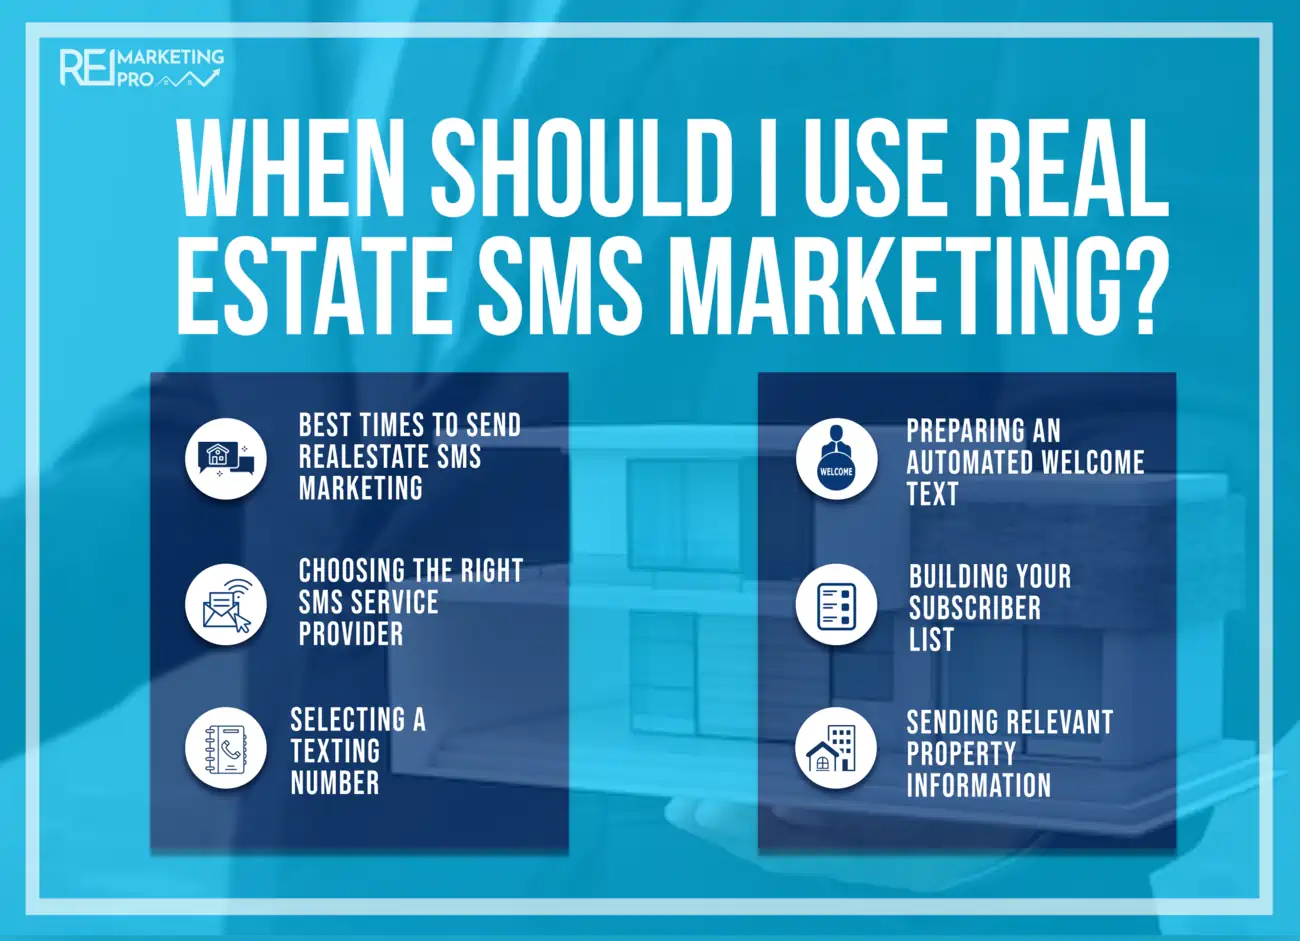 When Should I Use Real Estate SMS Marketing